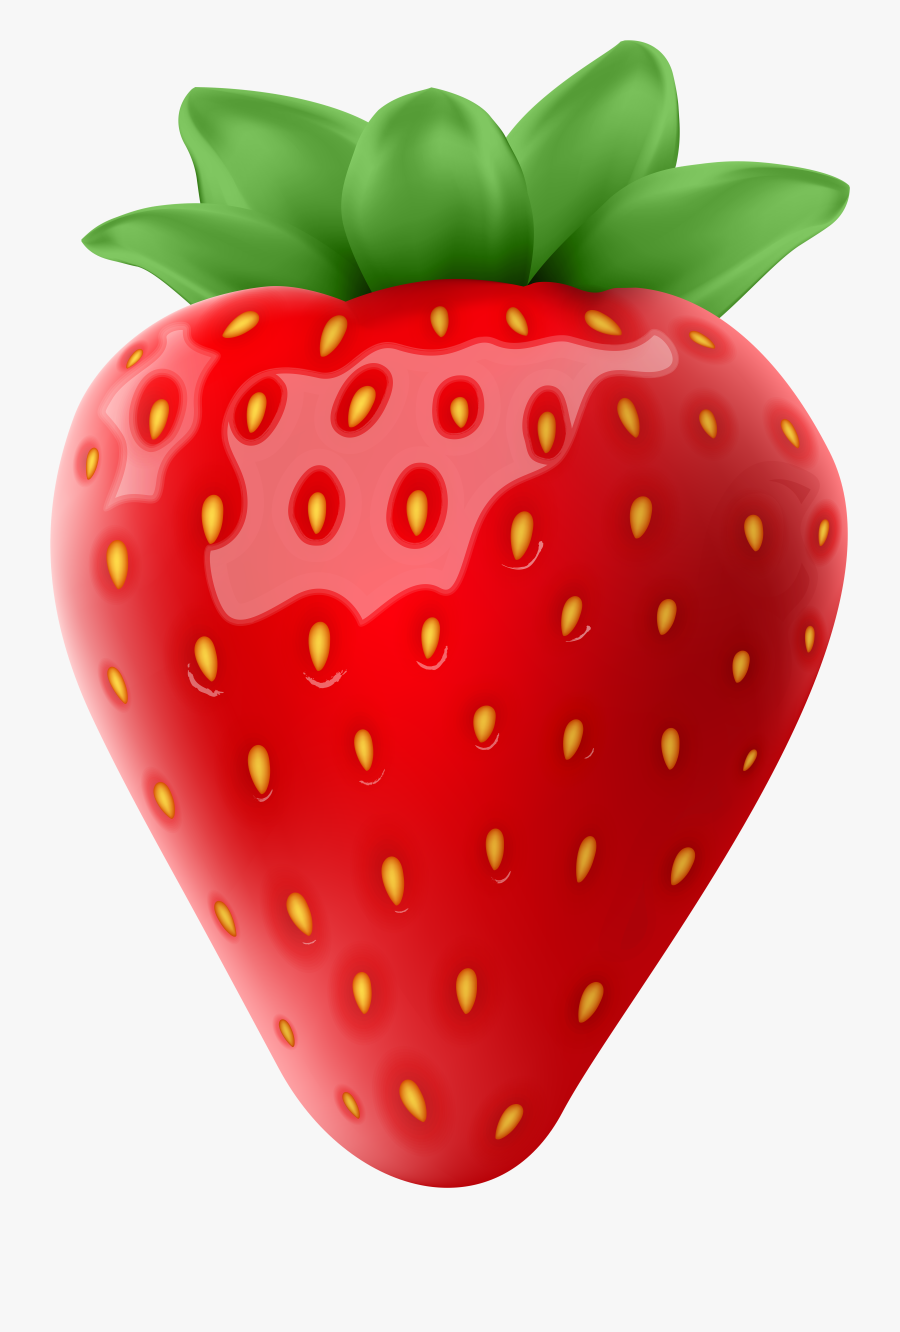 Transparent Png Strawberry - Strawberry Clipart Png, Transparent Clipart